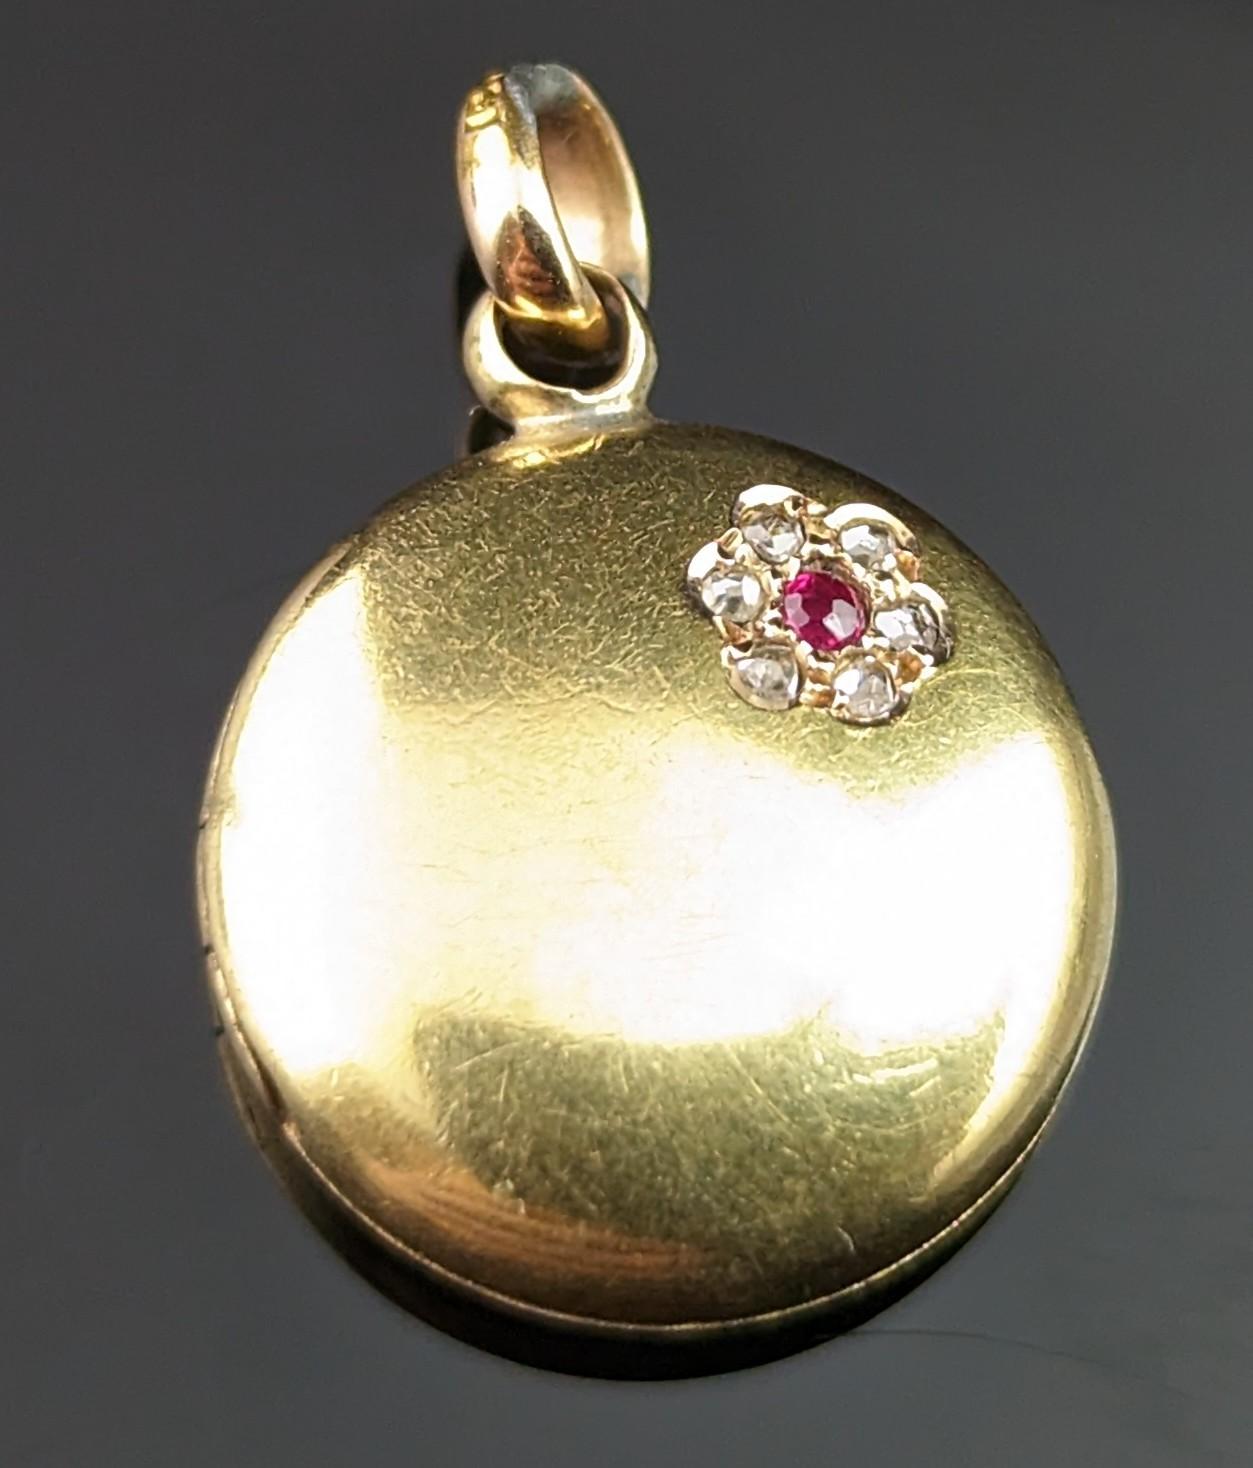 Ohh this dainty little antique Diamond and Ruby locket is just so sweet and adorable.

Teeny sized, it is a circular shaped locket in rich antique 15kt yellow gold, the gold has a slightly brushed finish giving it a warm aged glow.

To the front